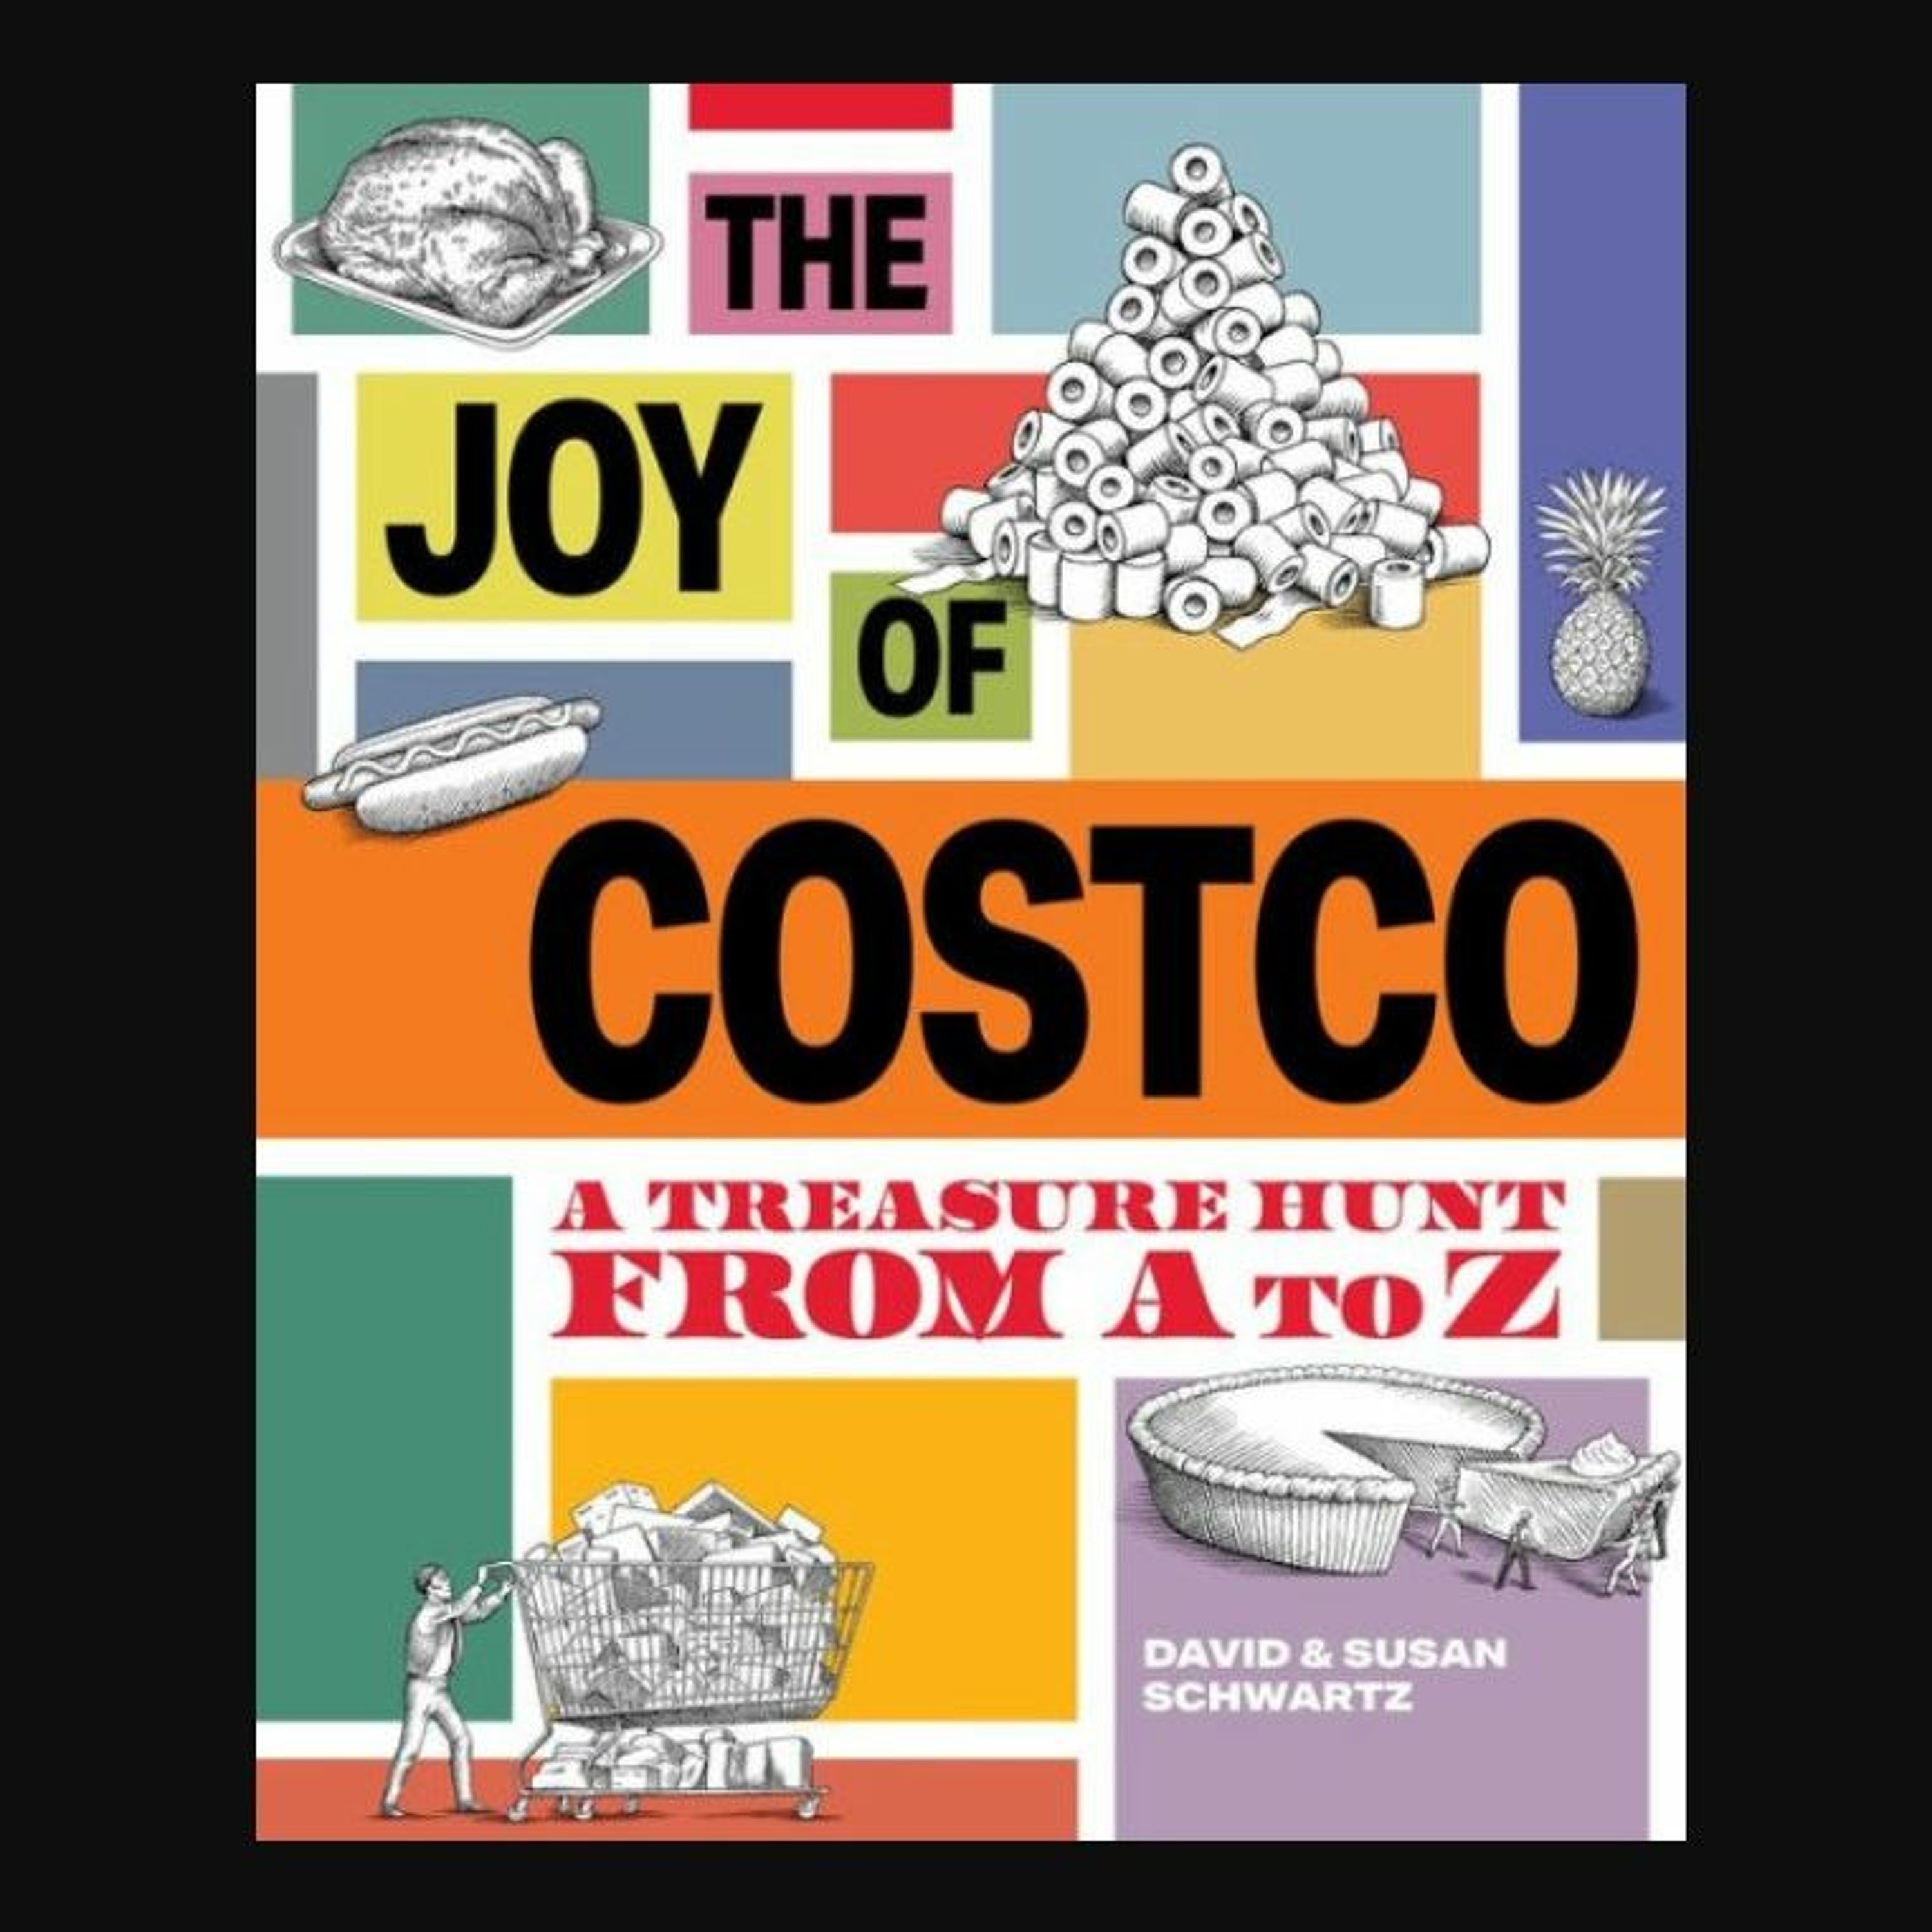 ”The Joy of Costco” - The Complete David and Susan Schwartz Interview